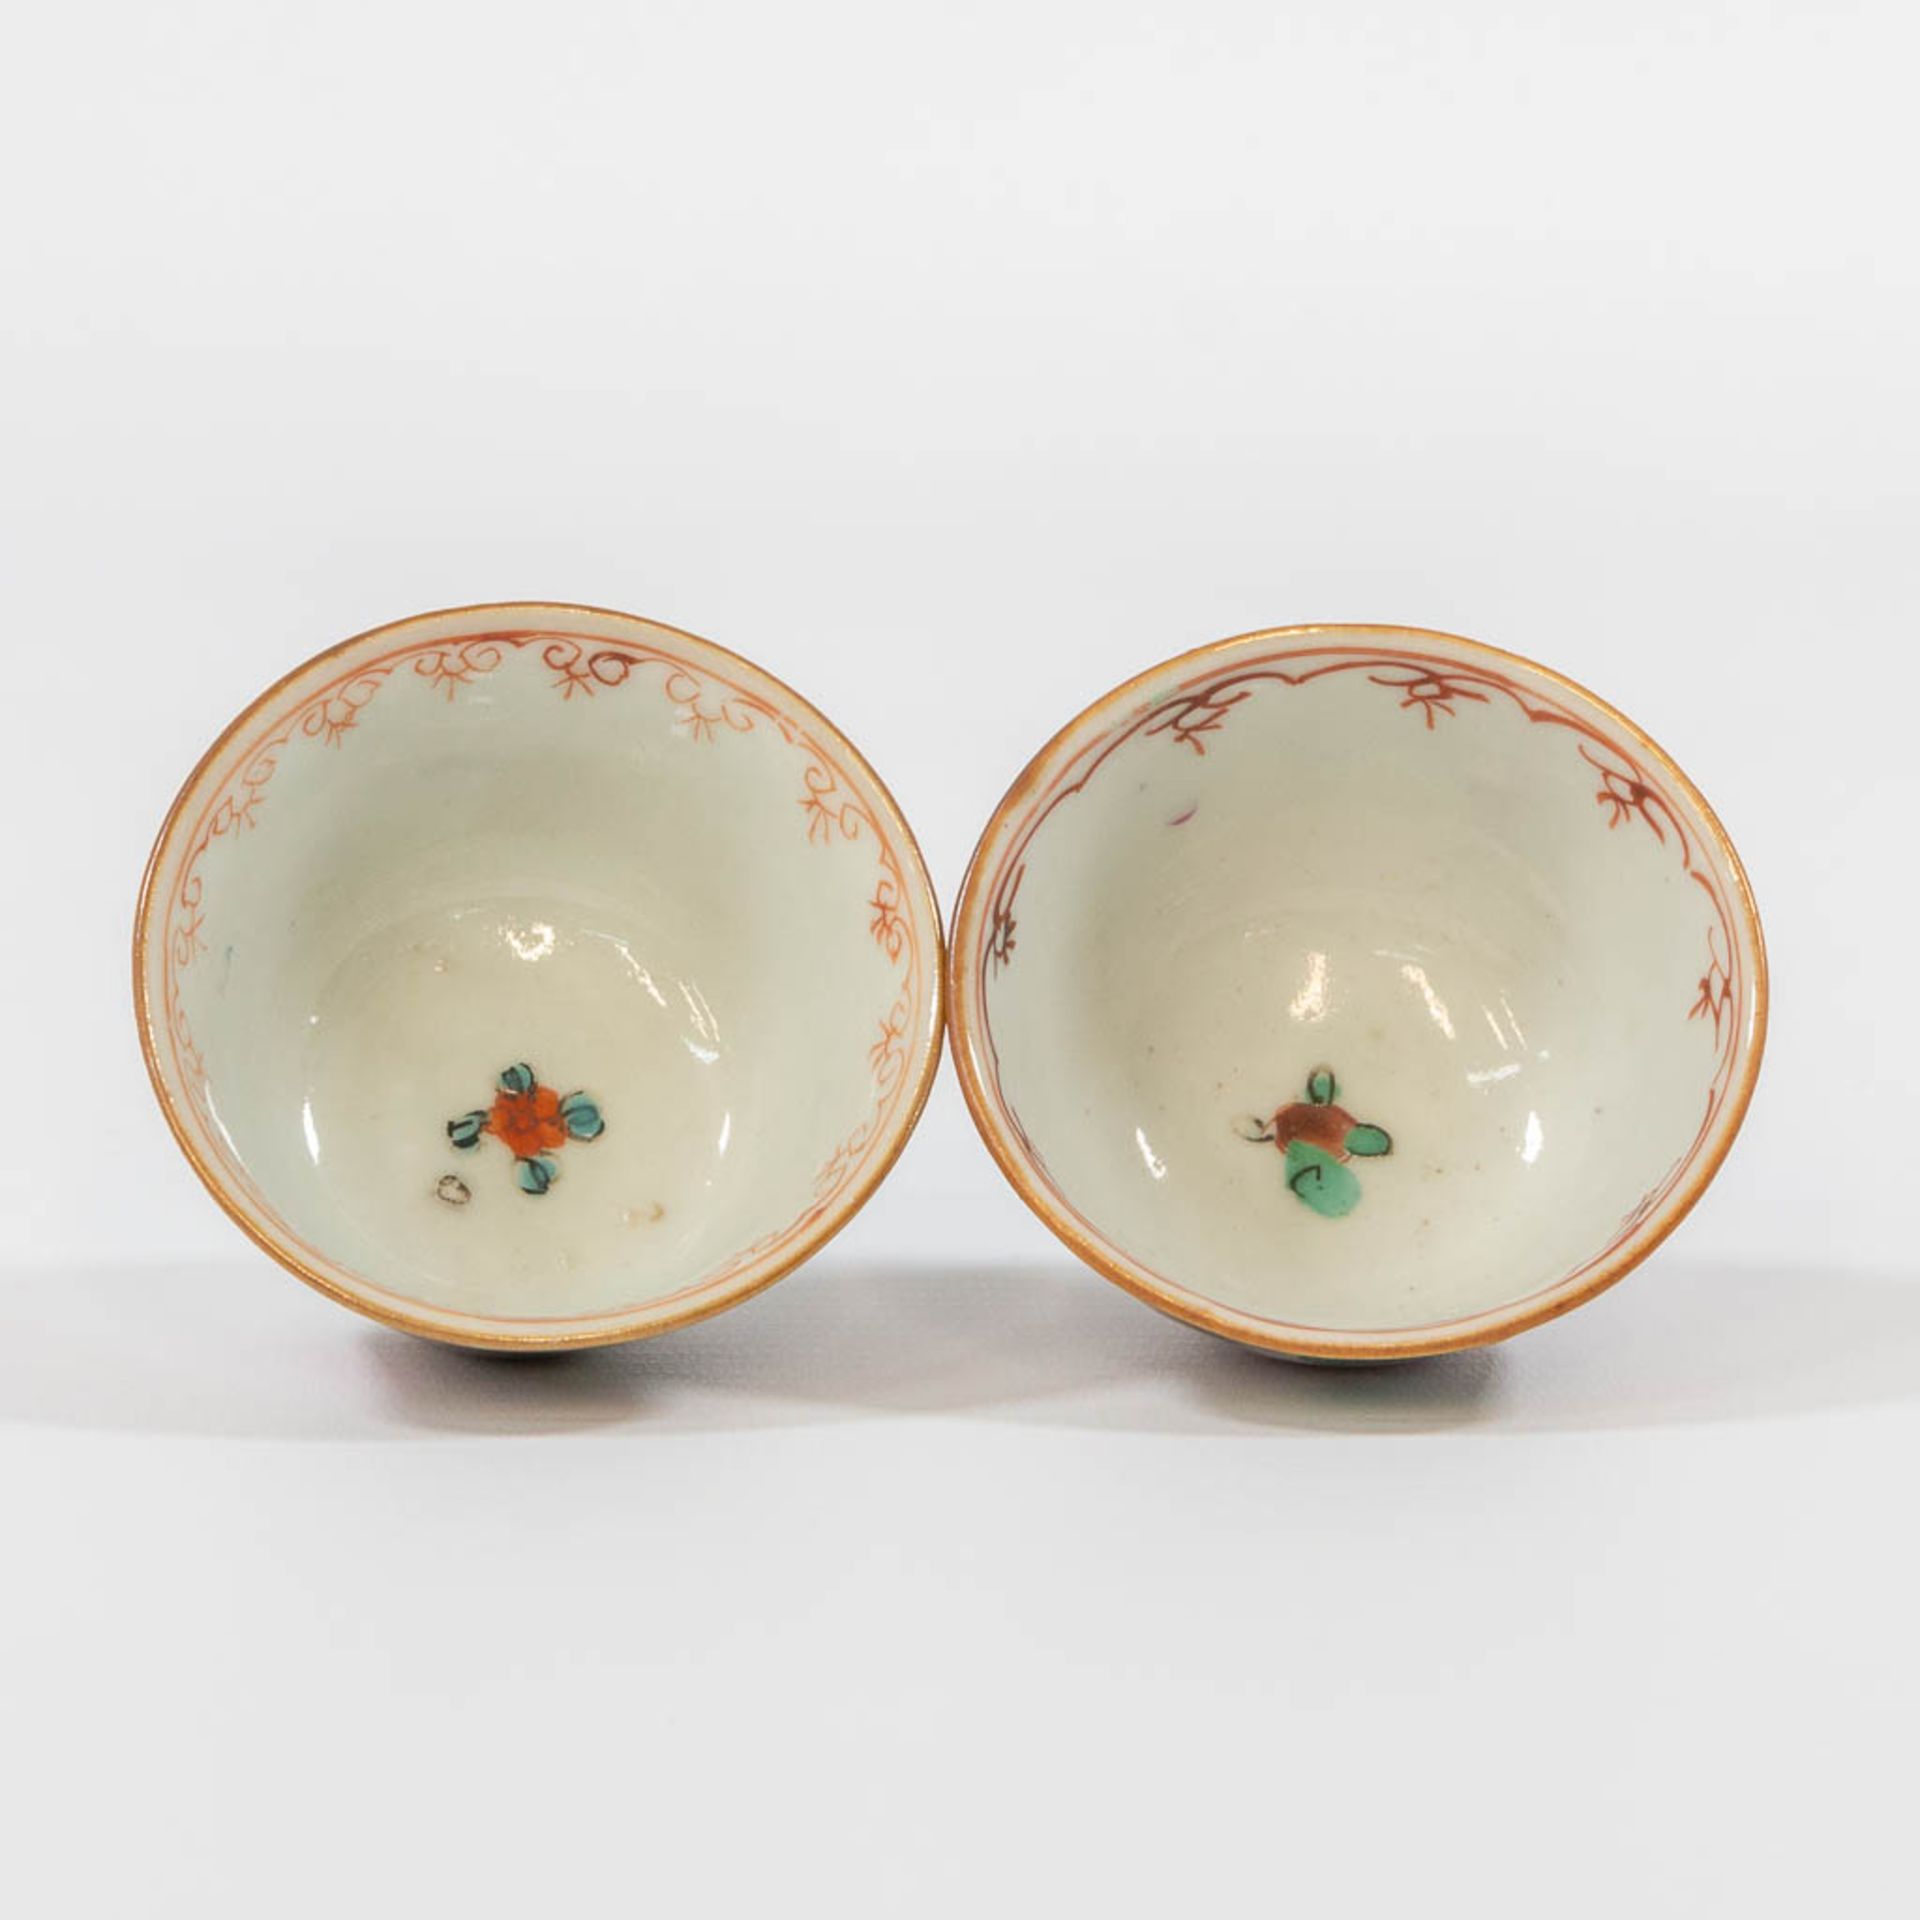 A collection of 12 Capucine Chinese porcelain items, consisting of 5 plates and 7 cups. - Image 16 of 26